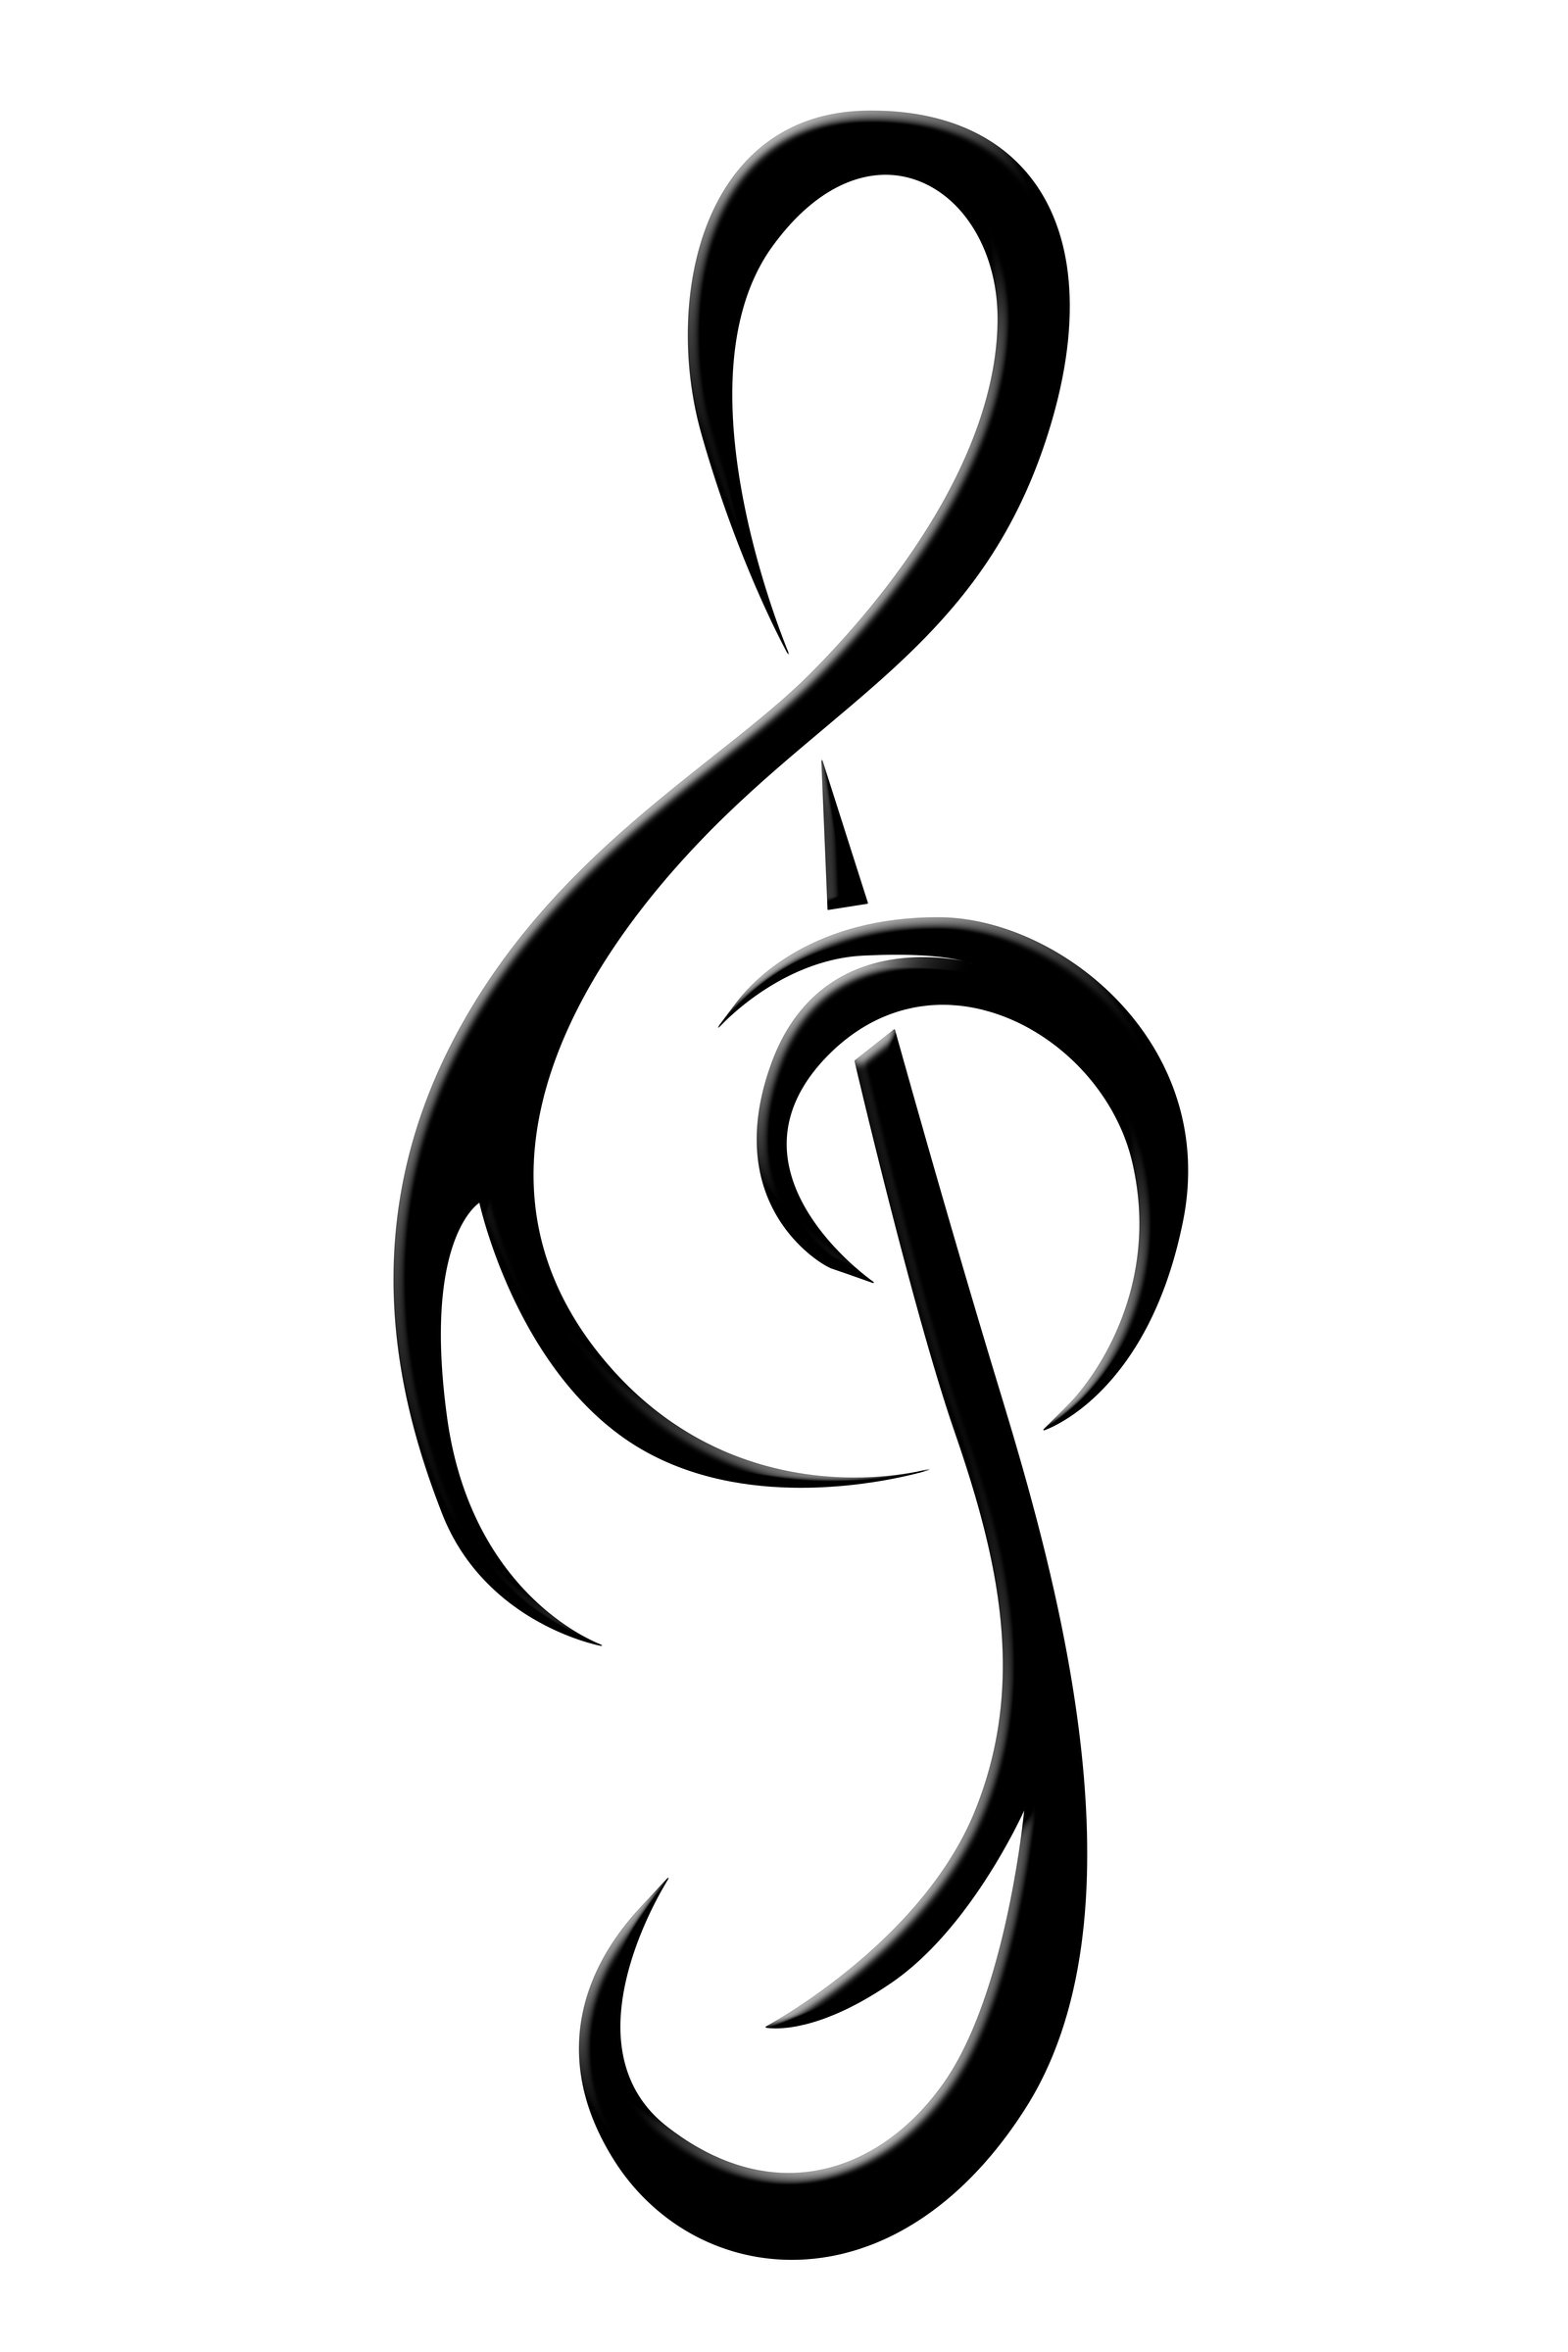 25 Treble Clef Stencil Free Cliparts That You Can Download To You